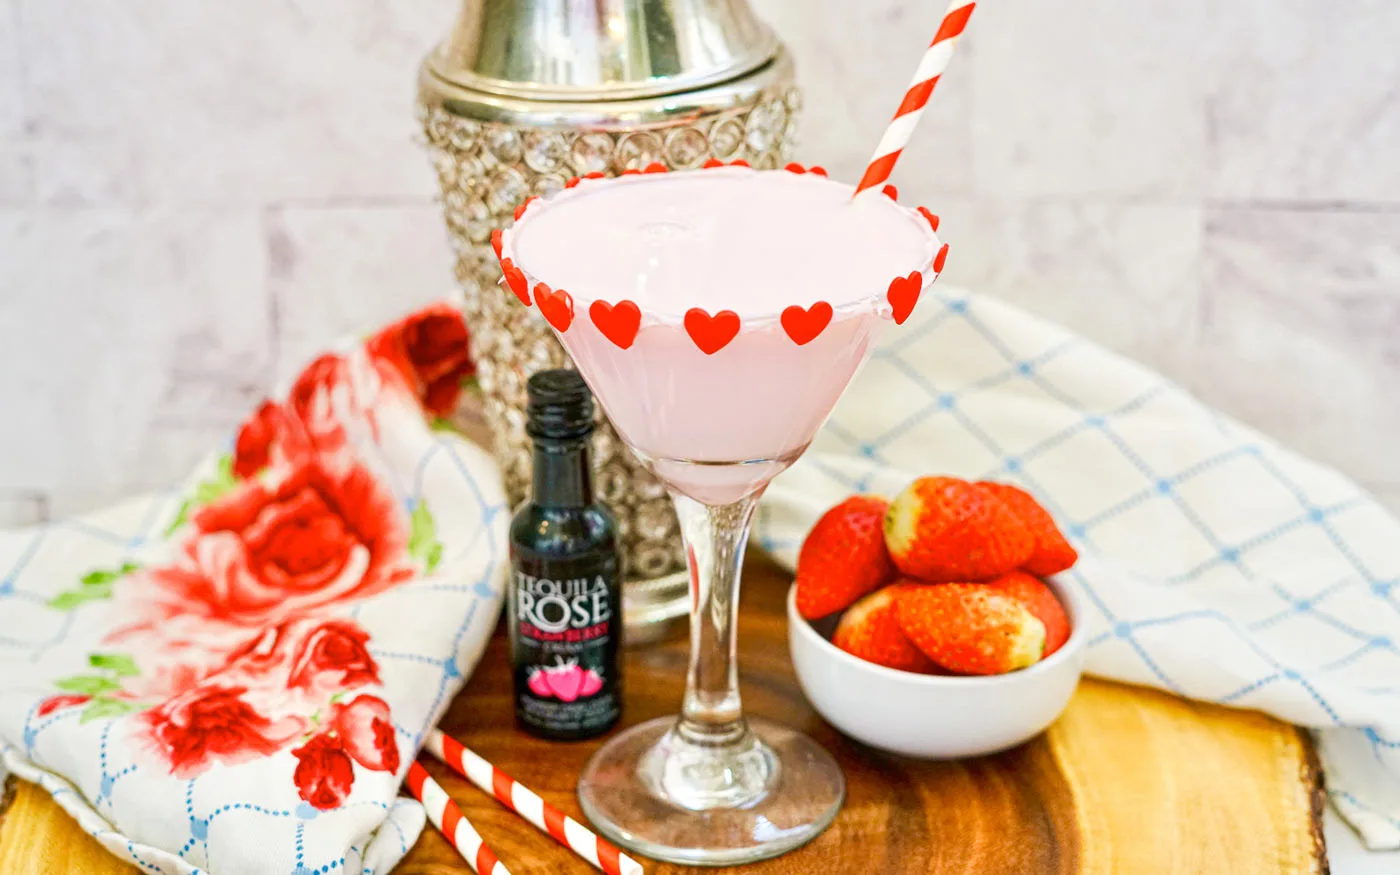 Chocolate strawberry martini with a shaker, bowl of strawberries and a bottle of tequila rose on a table top.